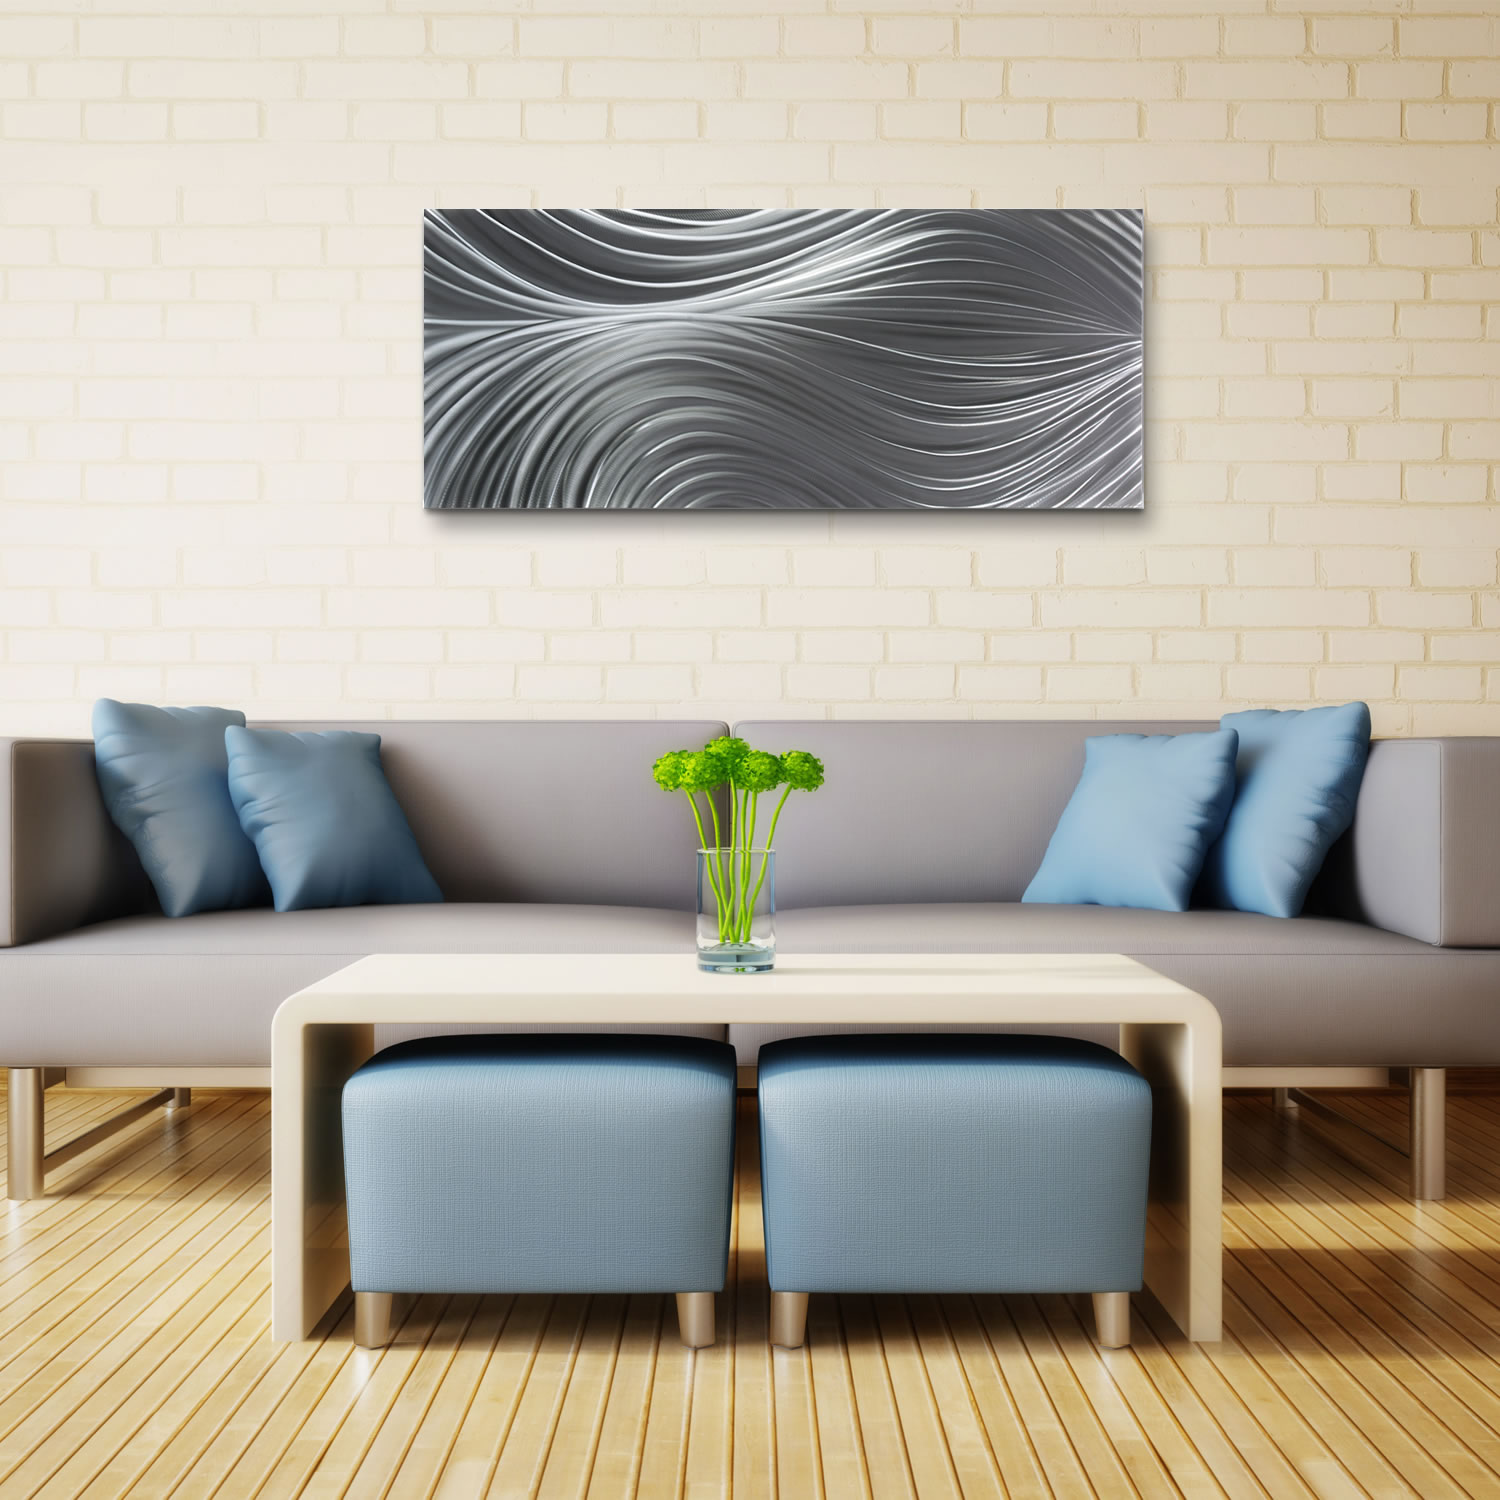 Passing Currents Composition - HD Metal Art Photo Print - Lifestyle Image